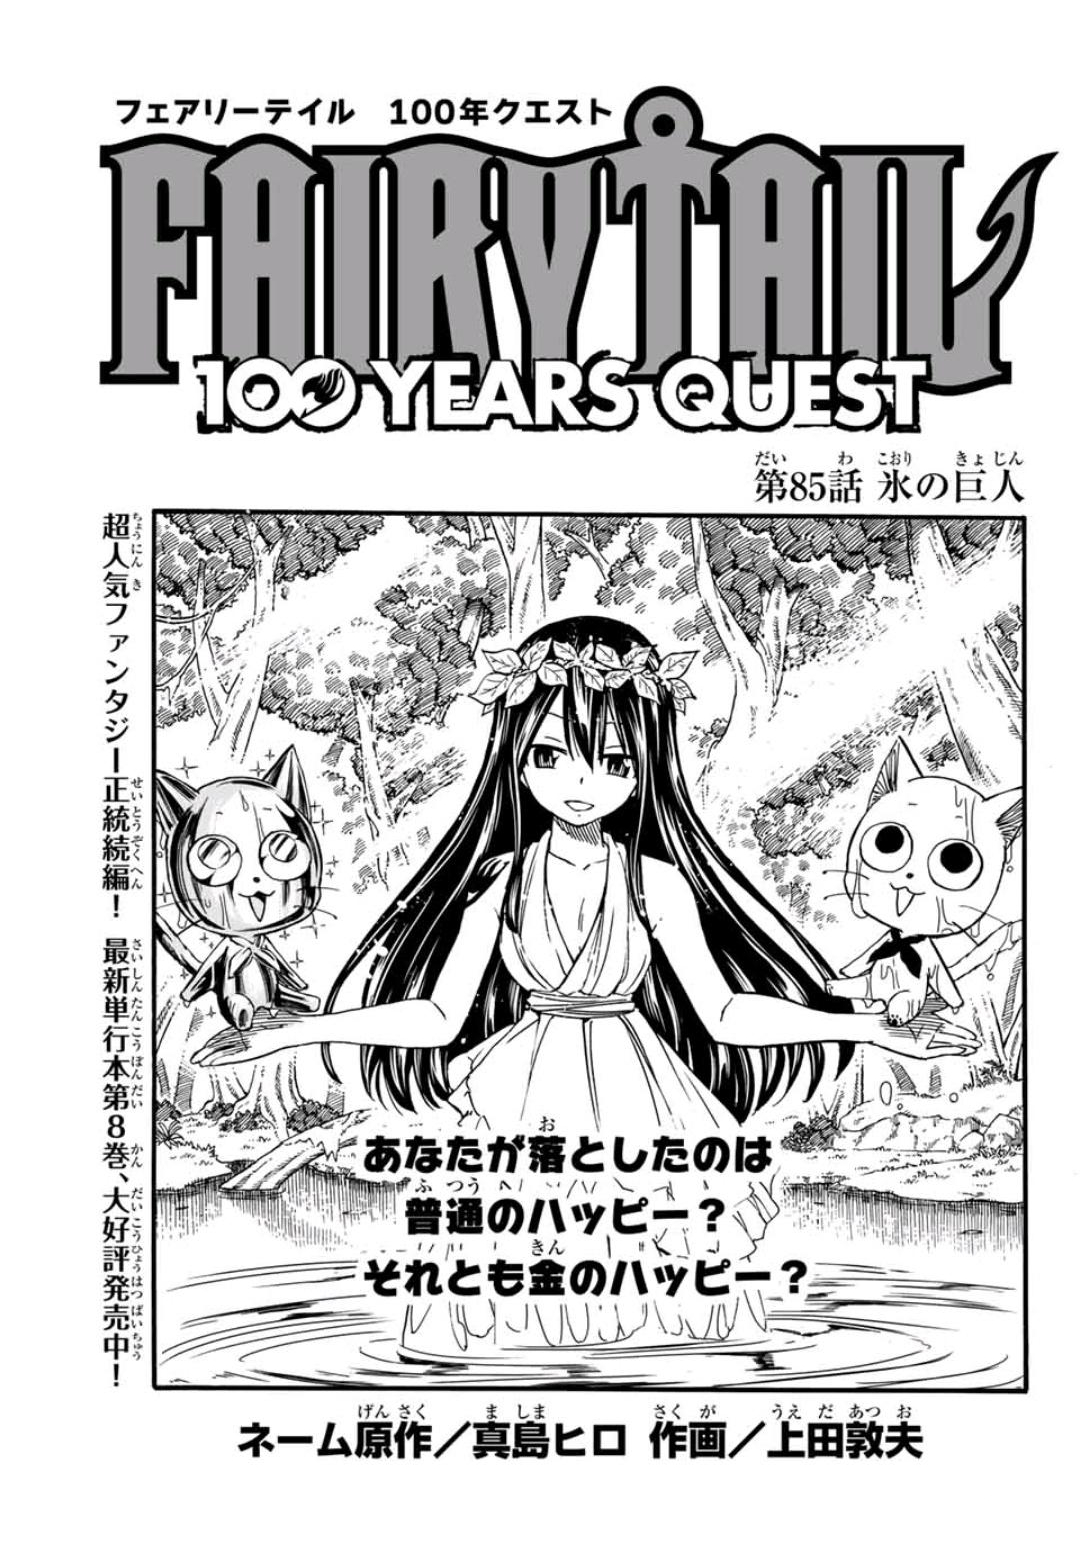 Fairy Tail 100 Years Quest Chapter 85 Fairy Tail Wiki Fandom